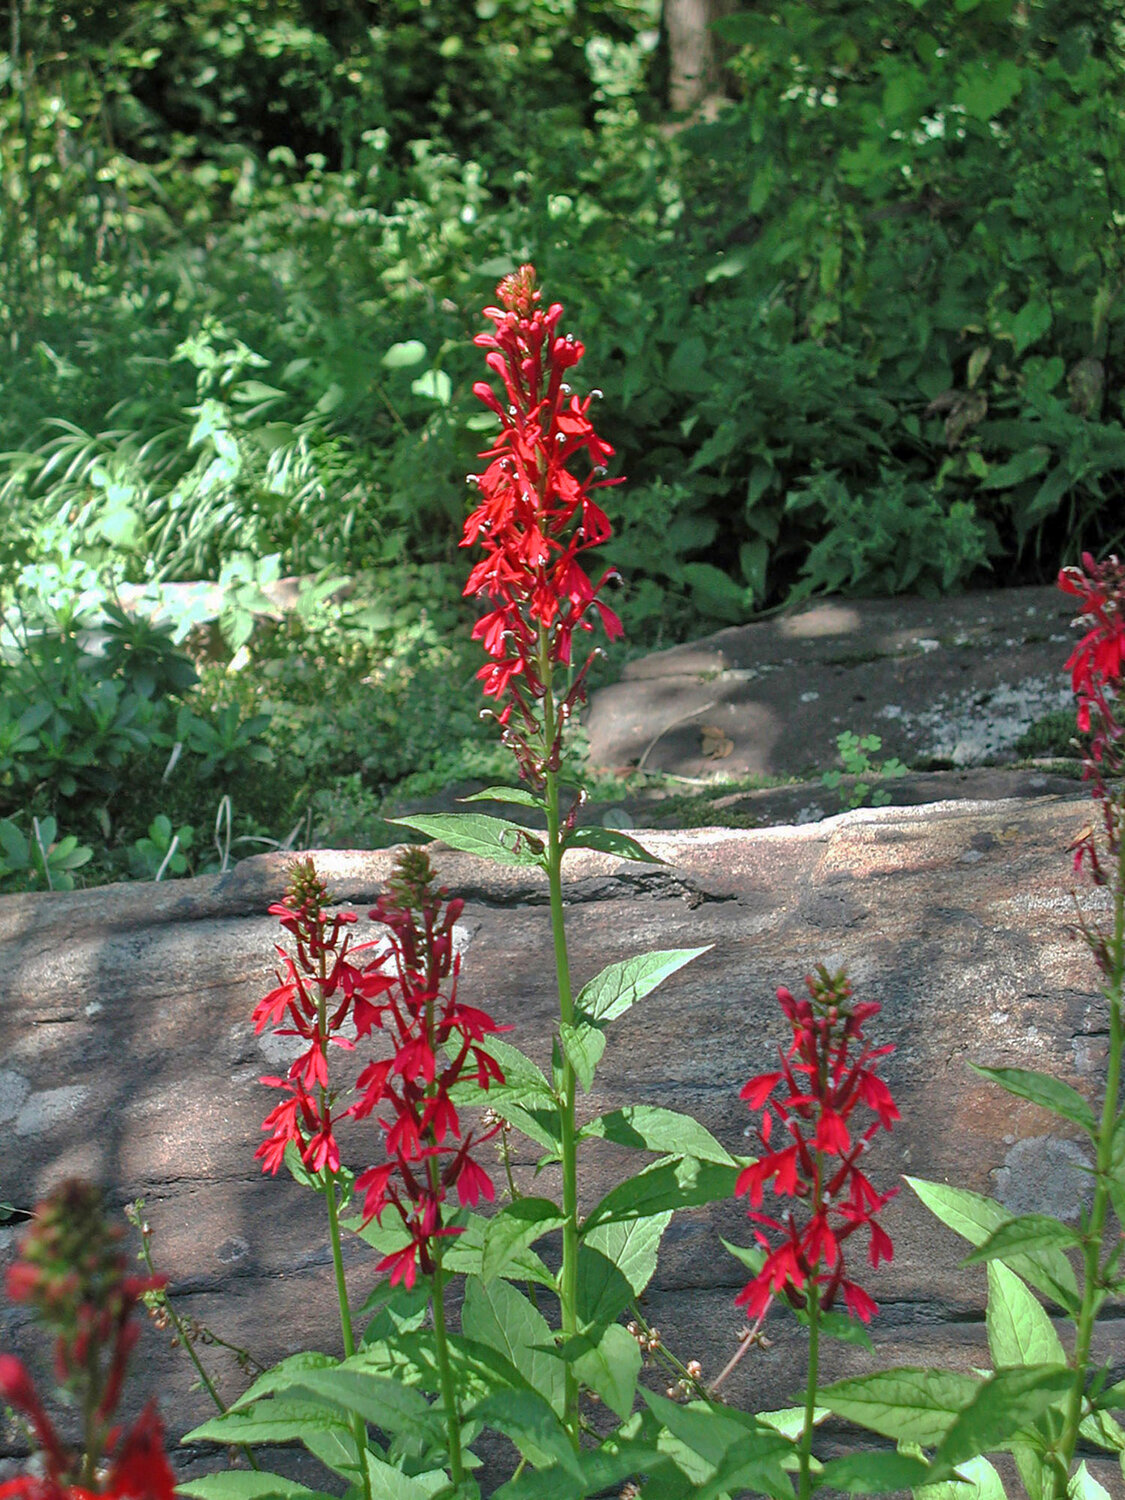 A red cardinal flower at the Chanticleer Garden in Wayne, Pa.